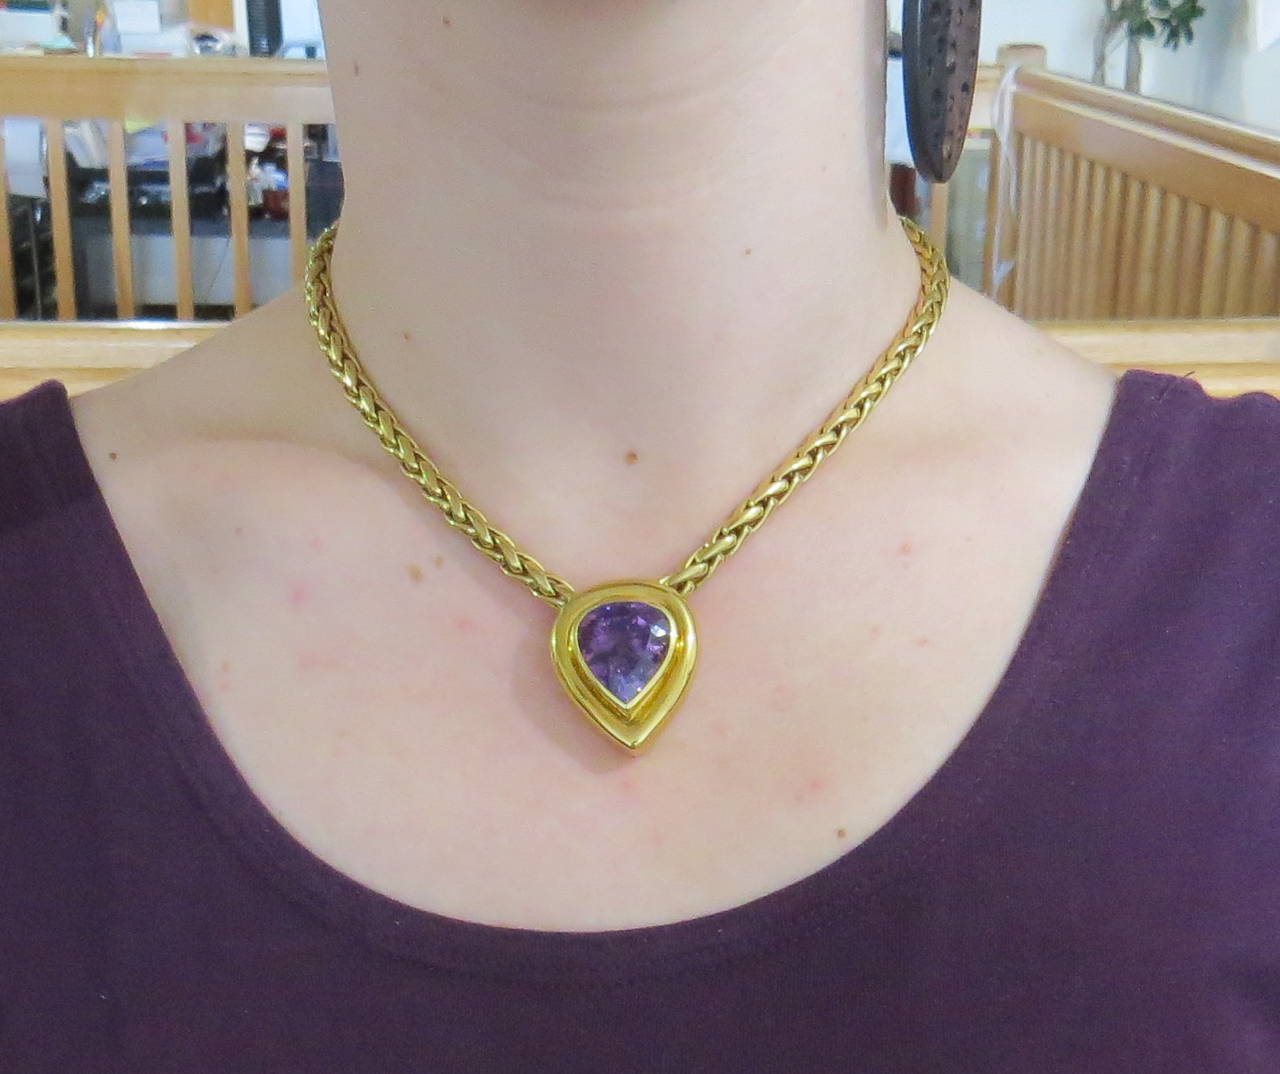 Impressive Tiffany & Co 18k gold necklace with approximately 20.5ct amethyst pendant. Necklace chain is 16 1/4